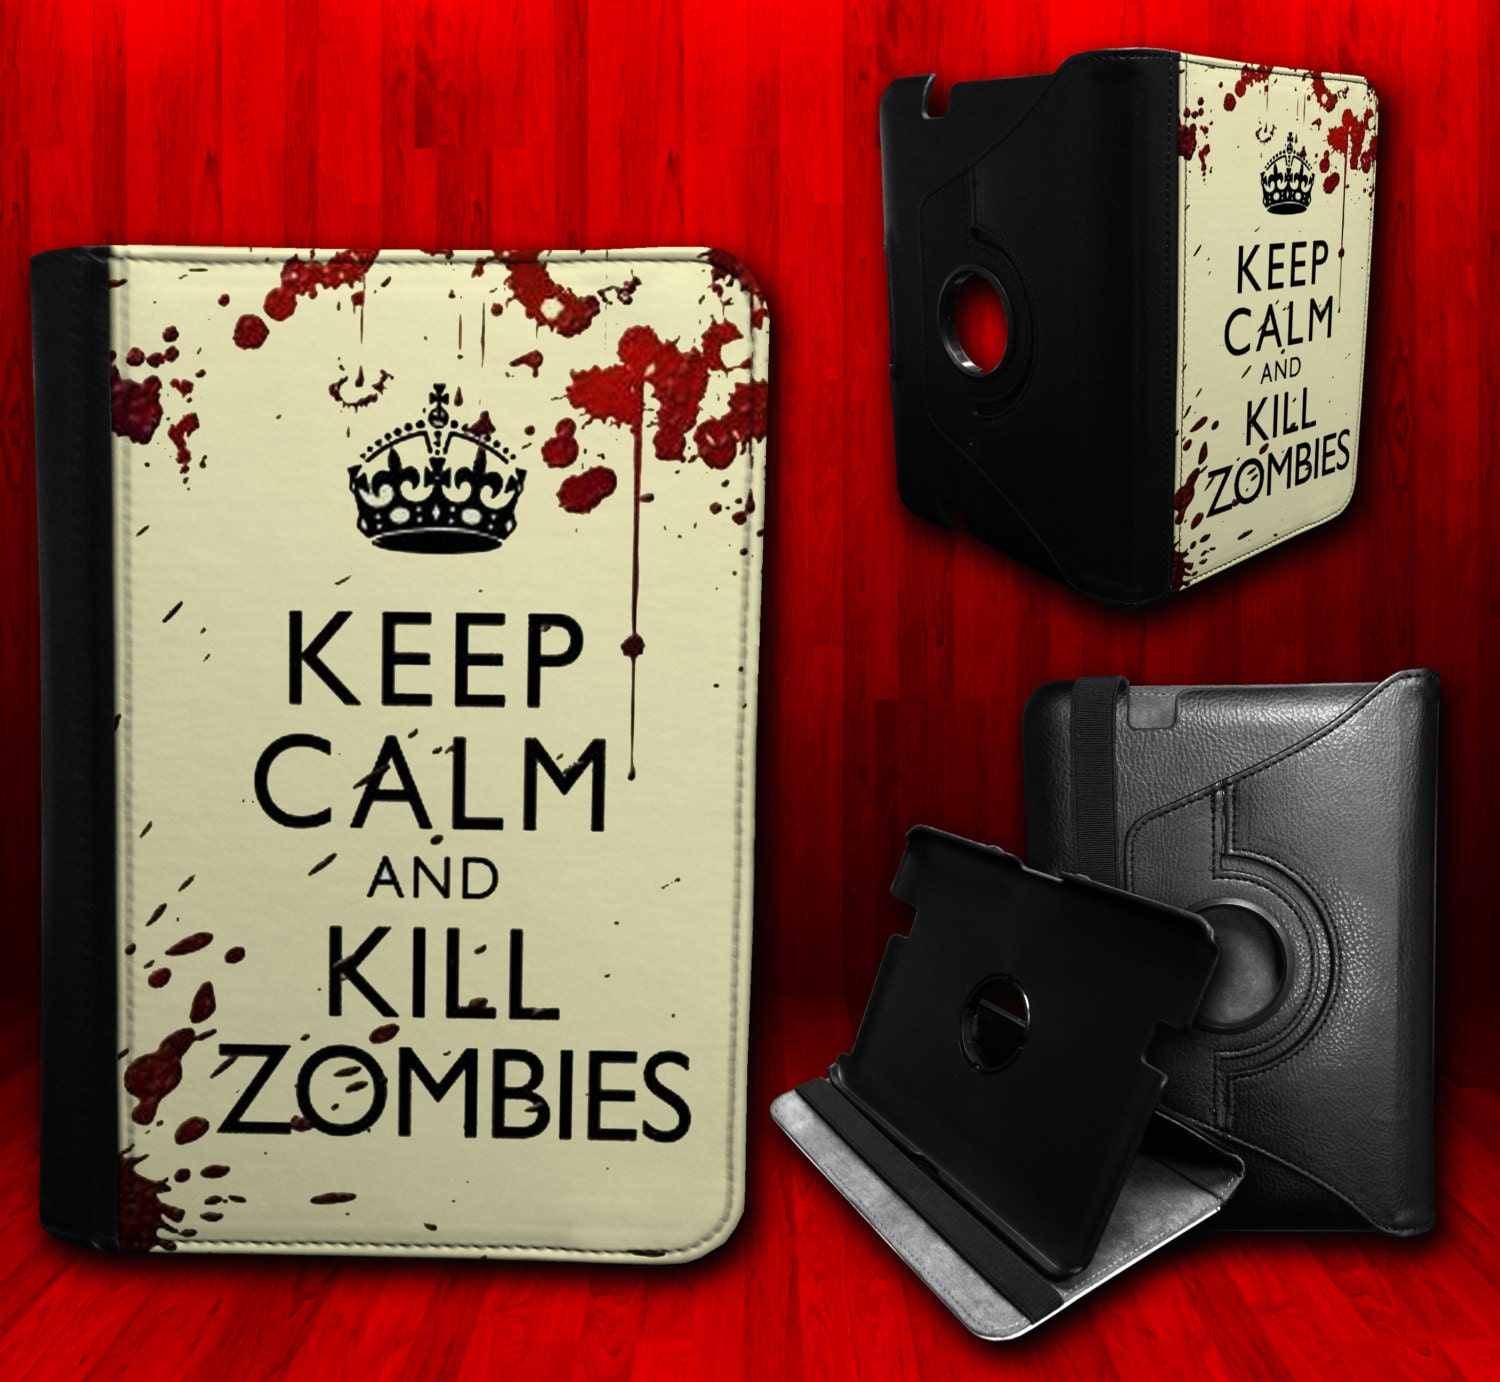 Keep Calm And Kill Zombies - Kindle Fire Hd 7" Leather Book Cover Case